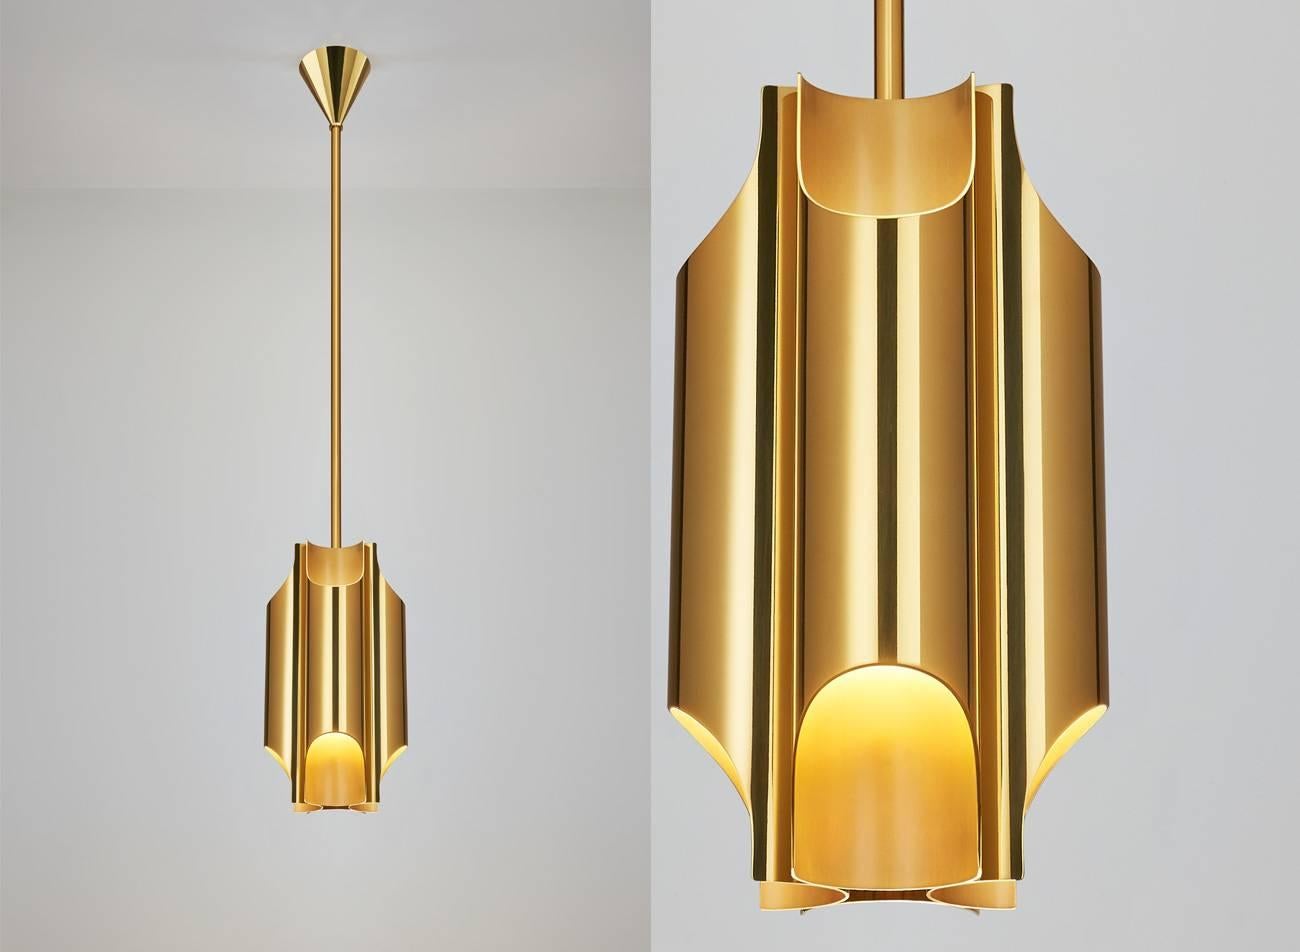 Suspension Orgues 4 pipes, made of brass varnished gold designed by Charles, made in France.